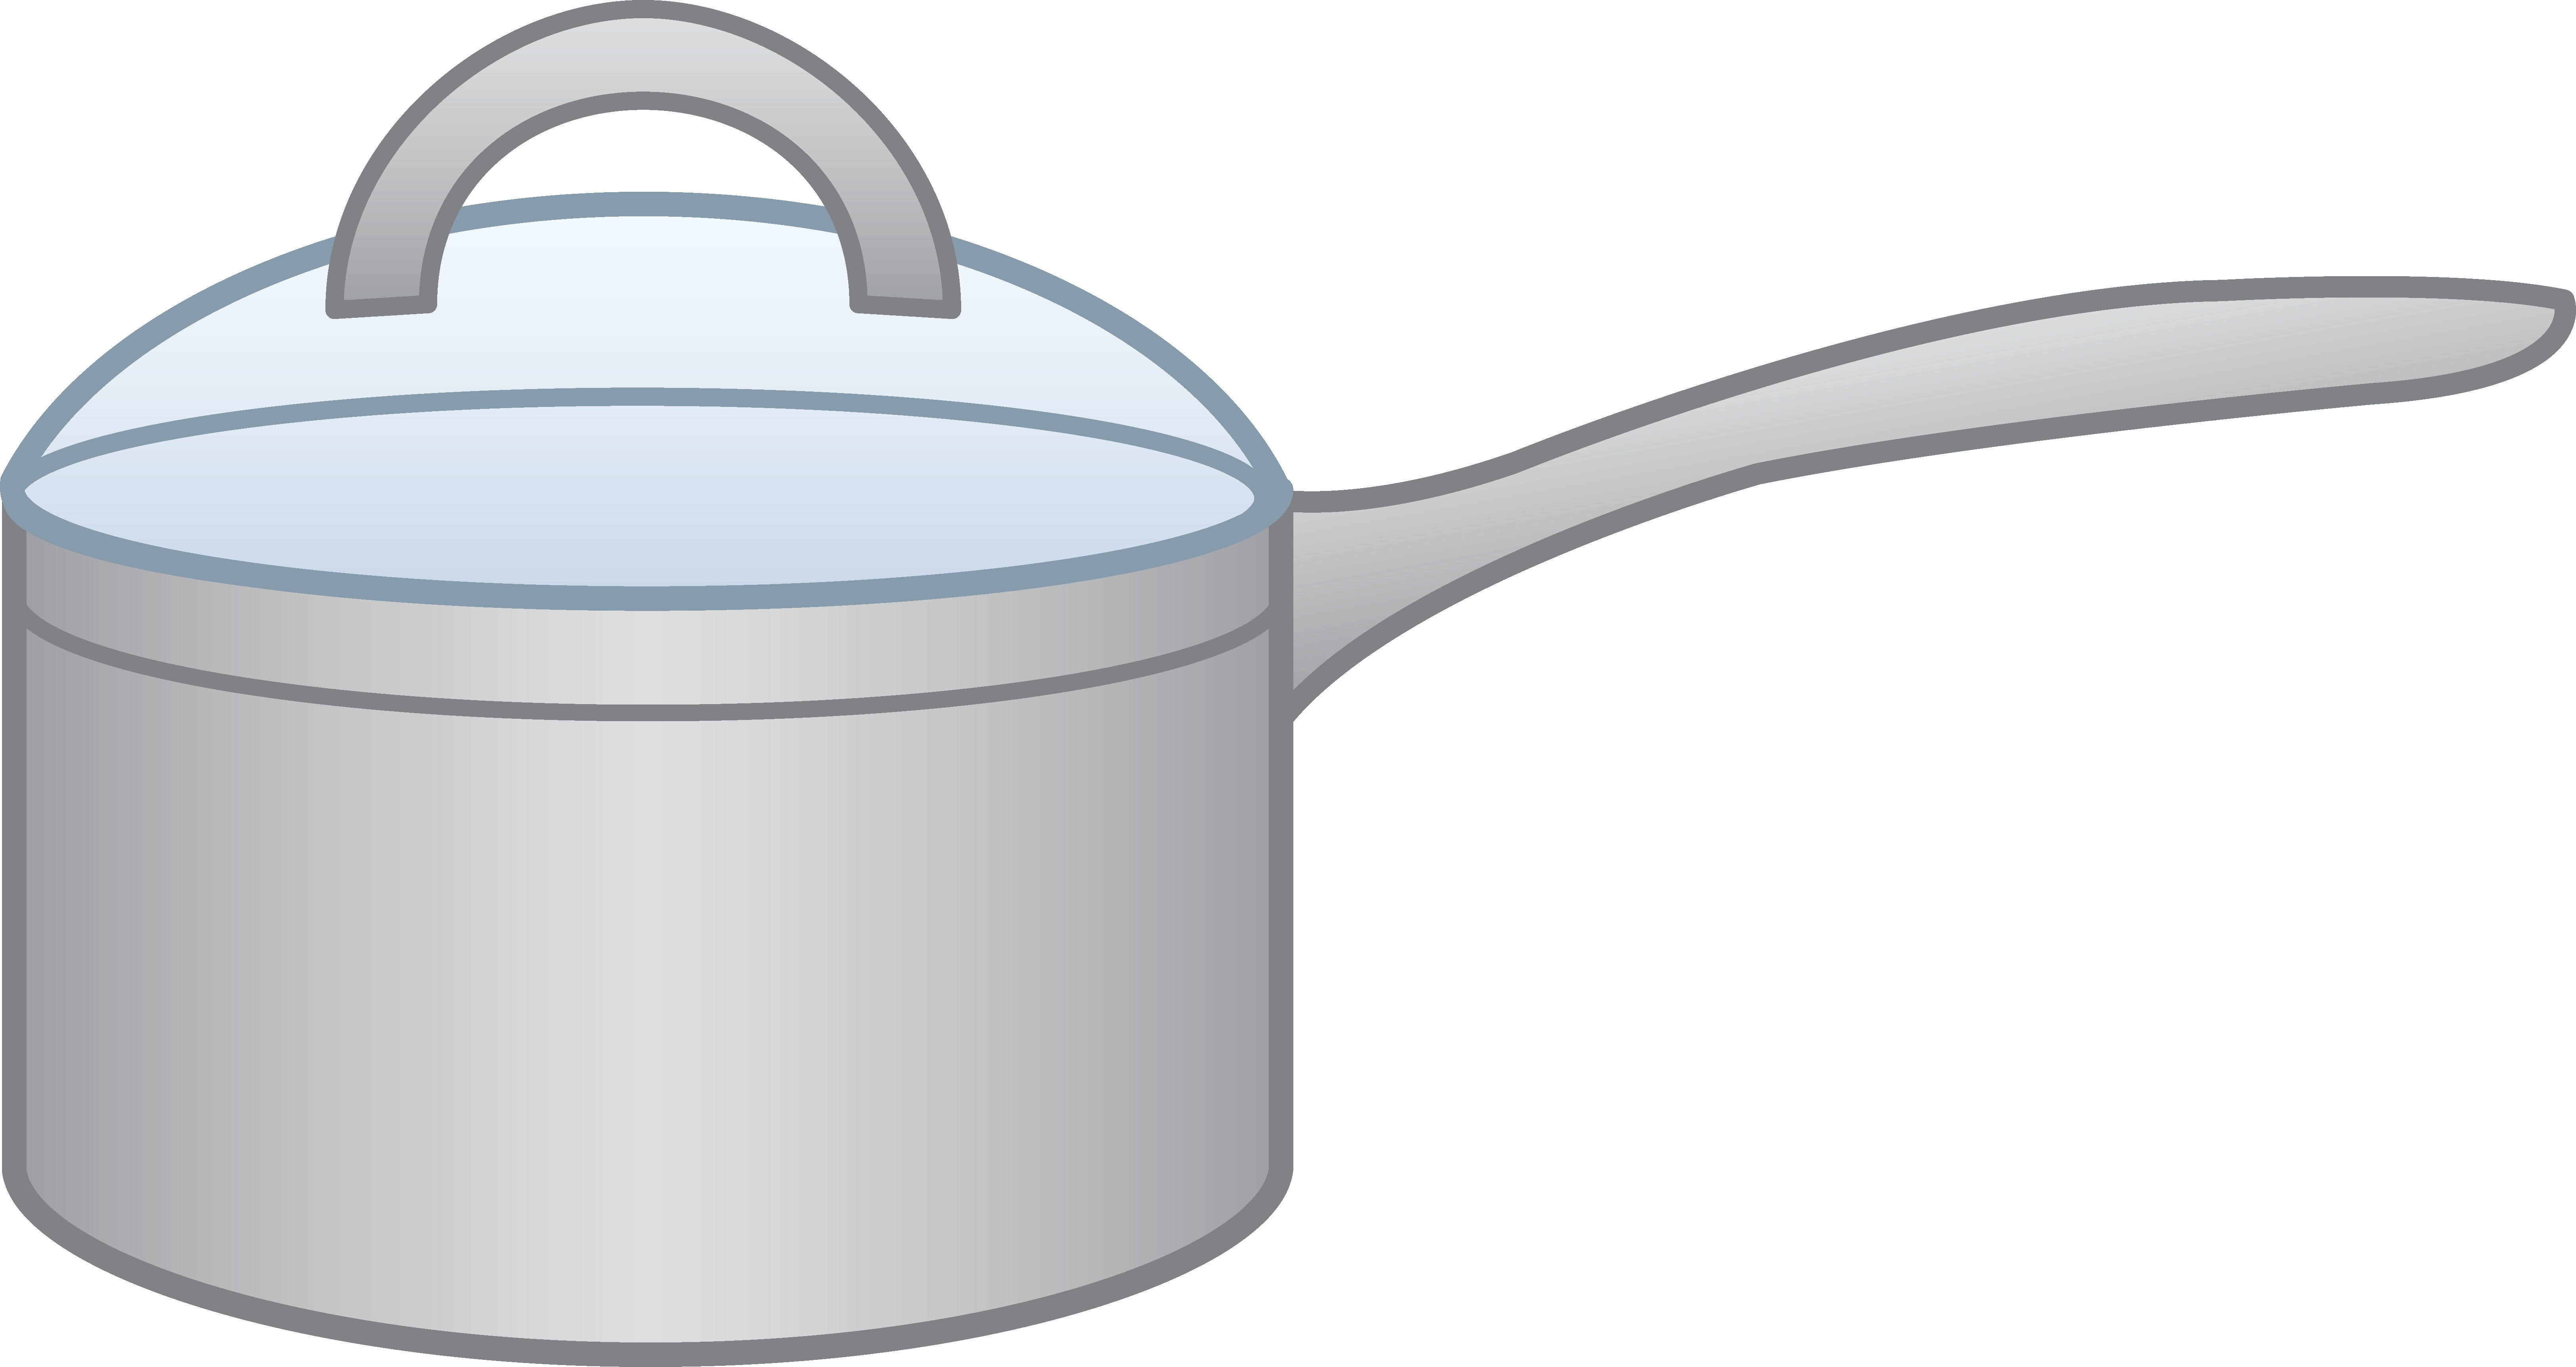 Cooking pan clipart